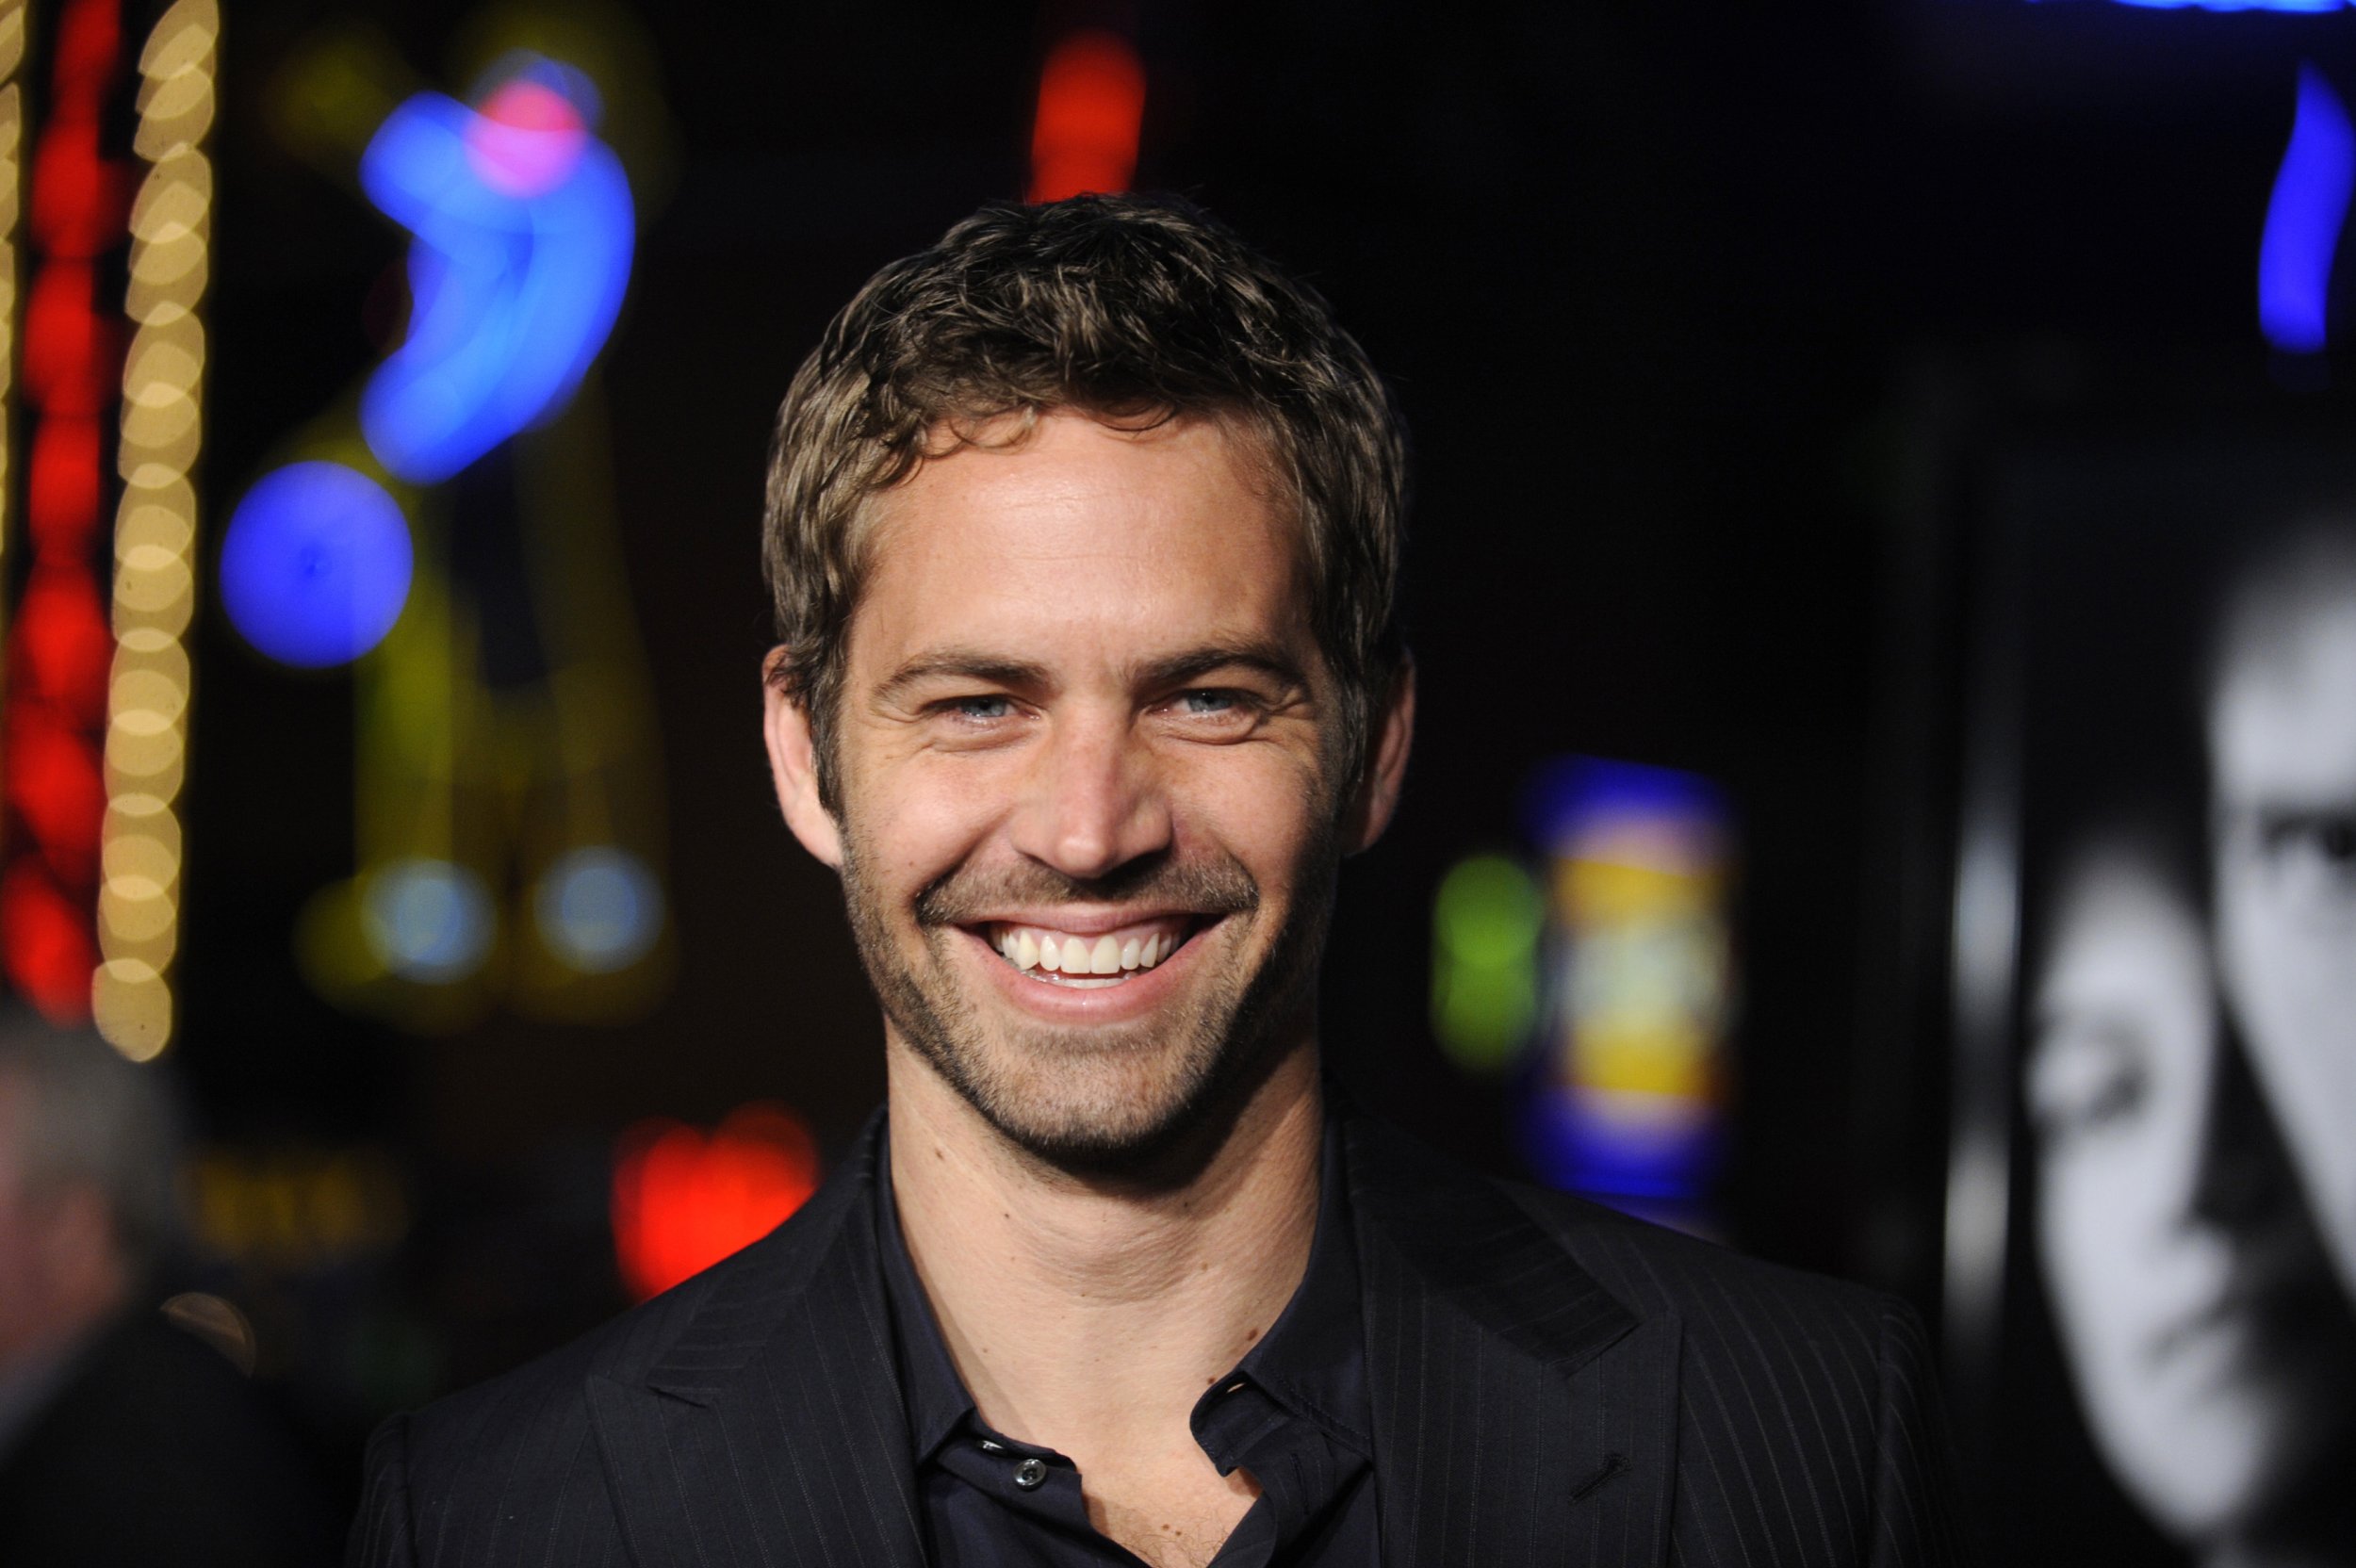 Furious 7': Lesser Known Facts about Paul Walker [Photos] - IBTimes India